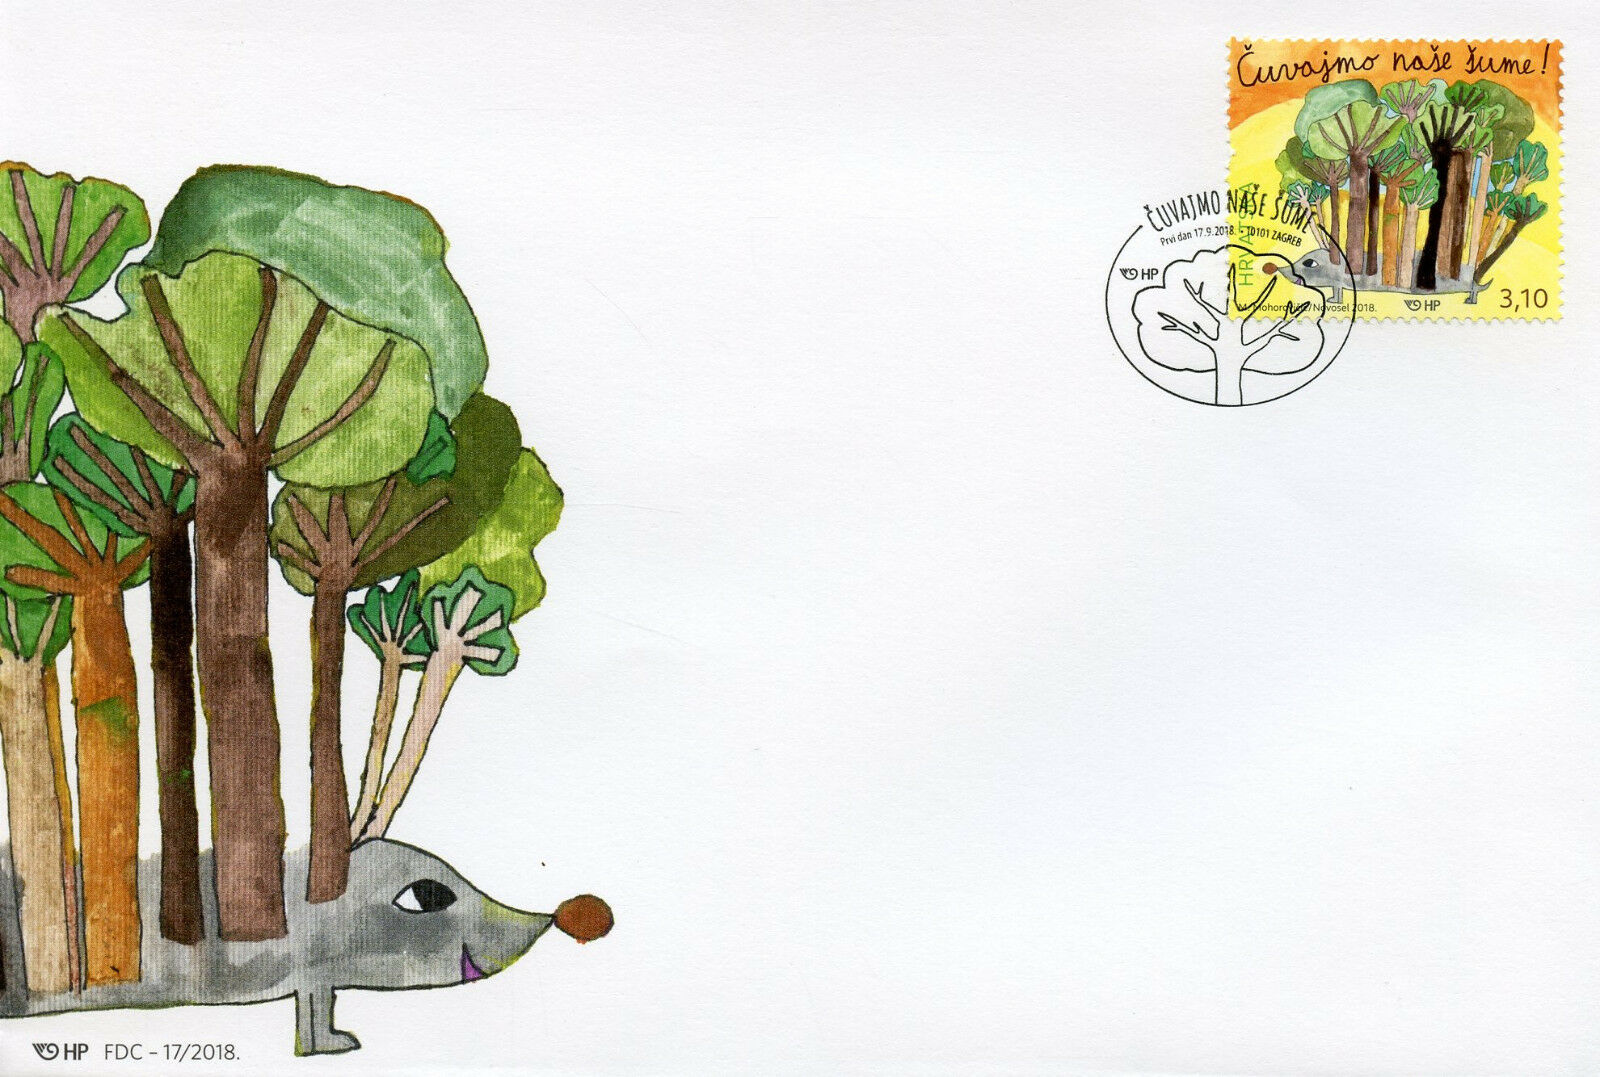 Croatia 2018 FDC Protect Forests Childrens Stamp 1v Cover Trees Nature Stamps